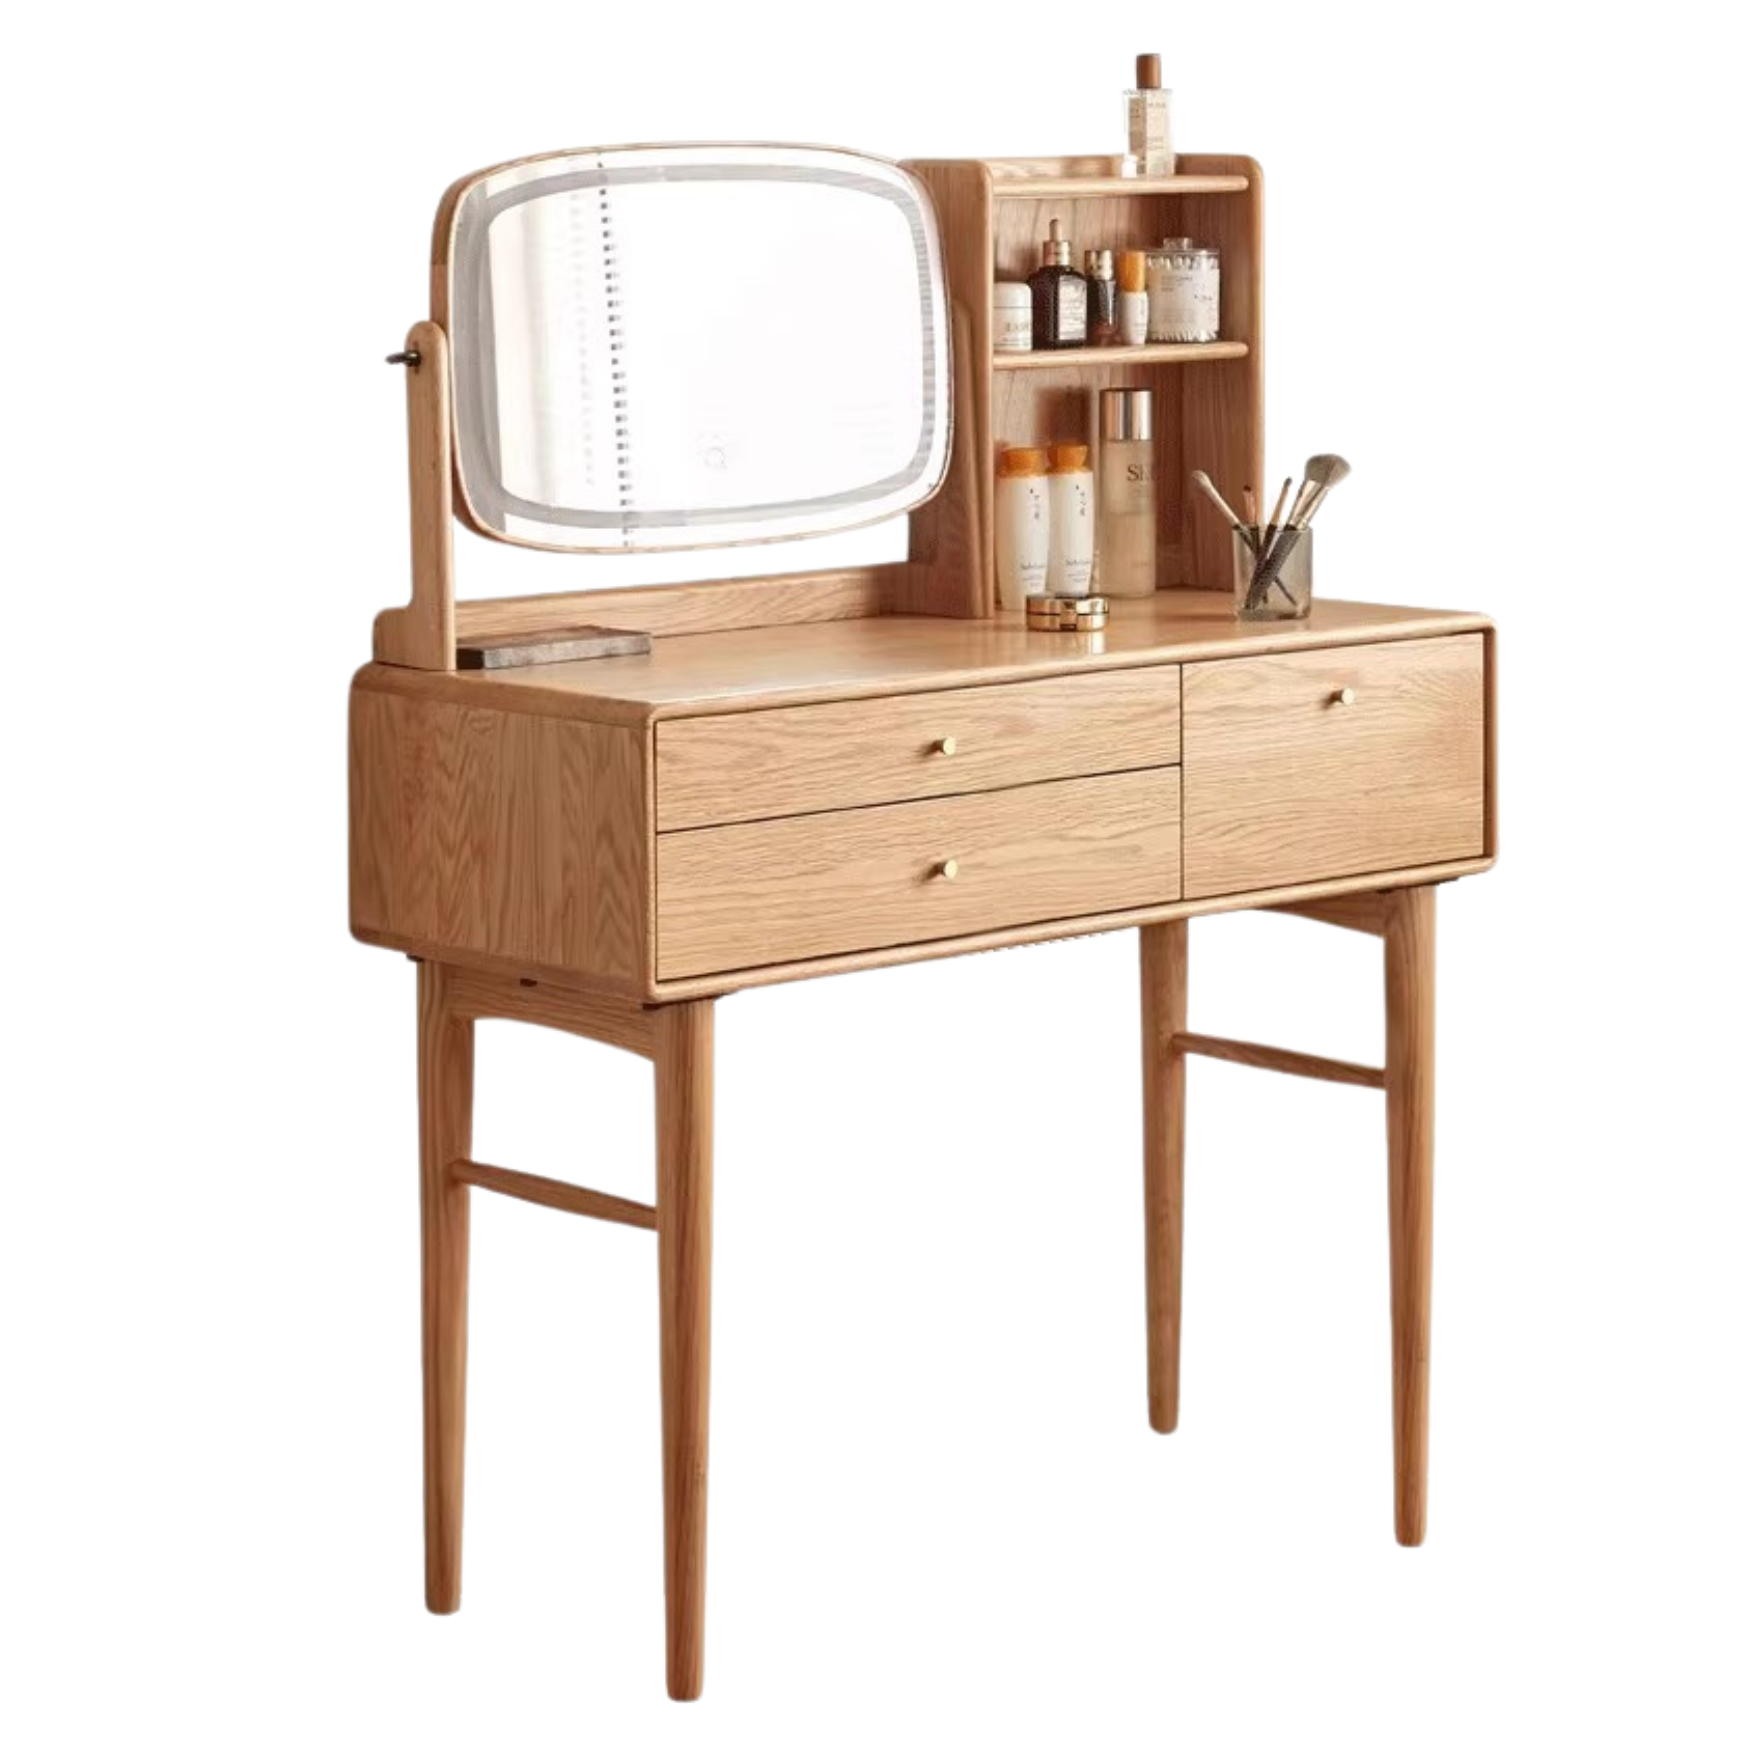 Oak solid wood Dressing table lighted makeup mirror